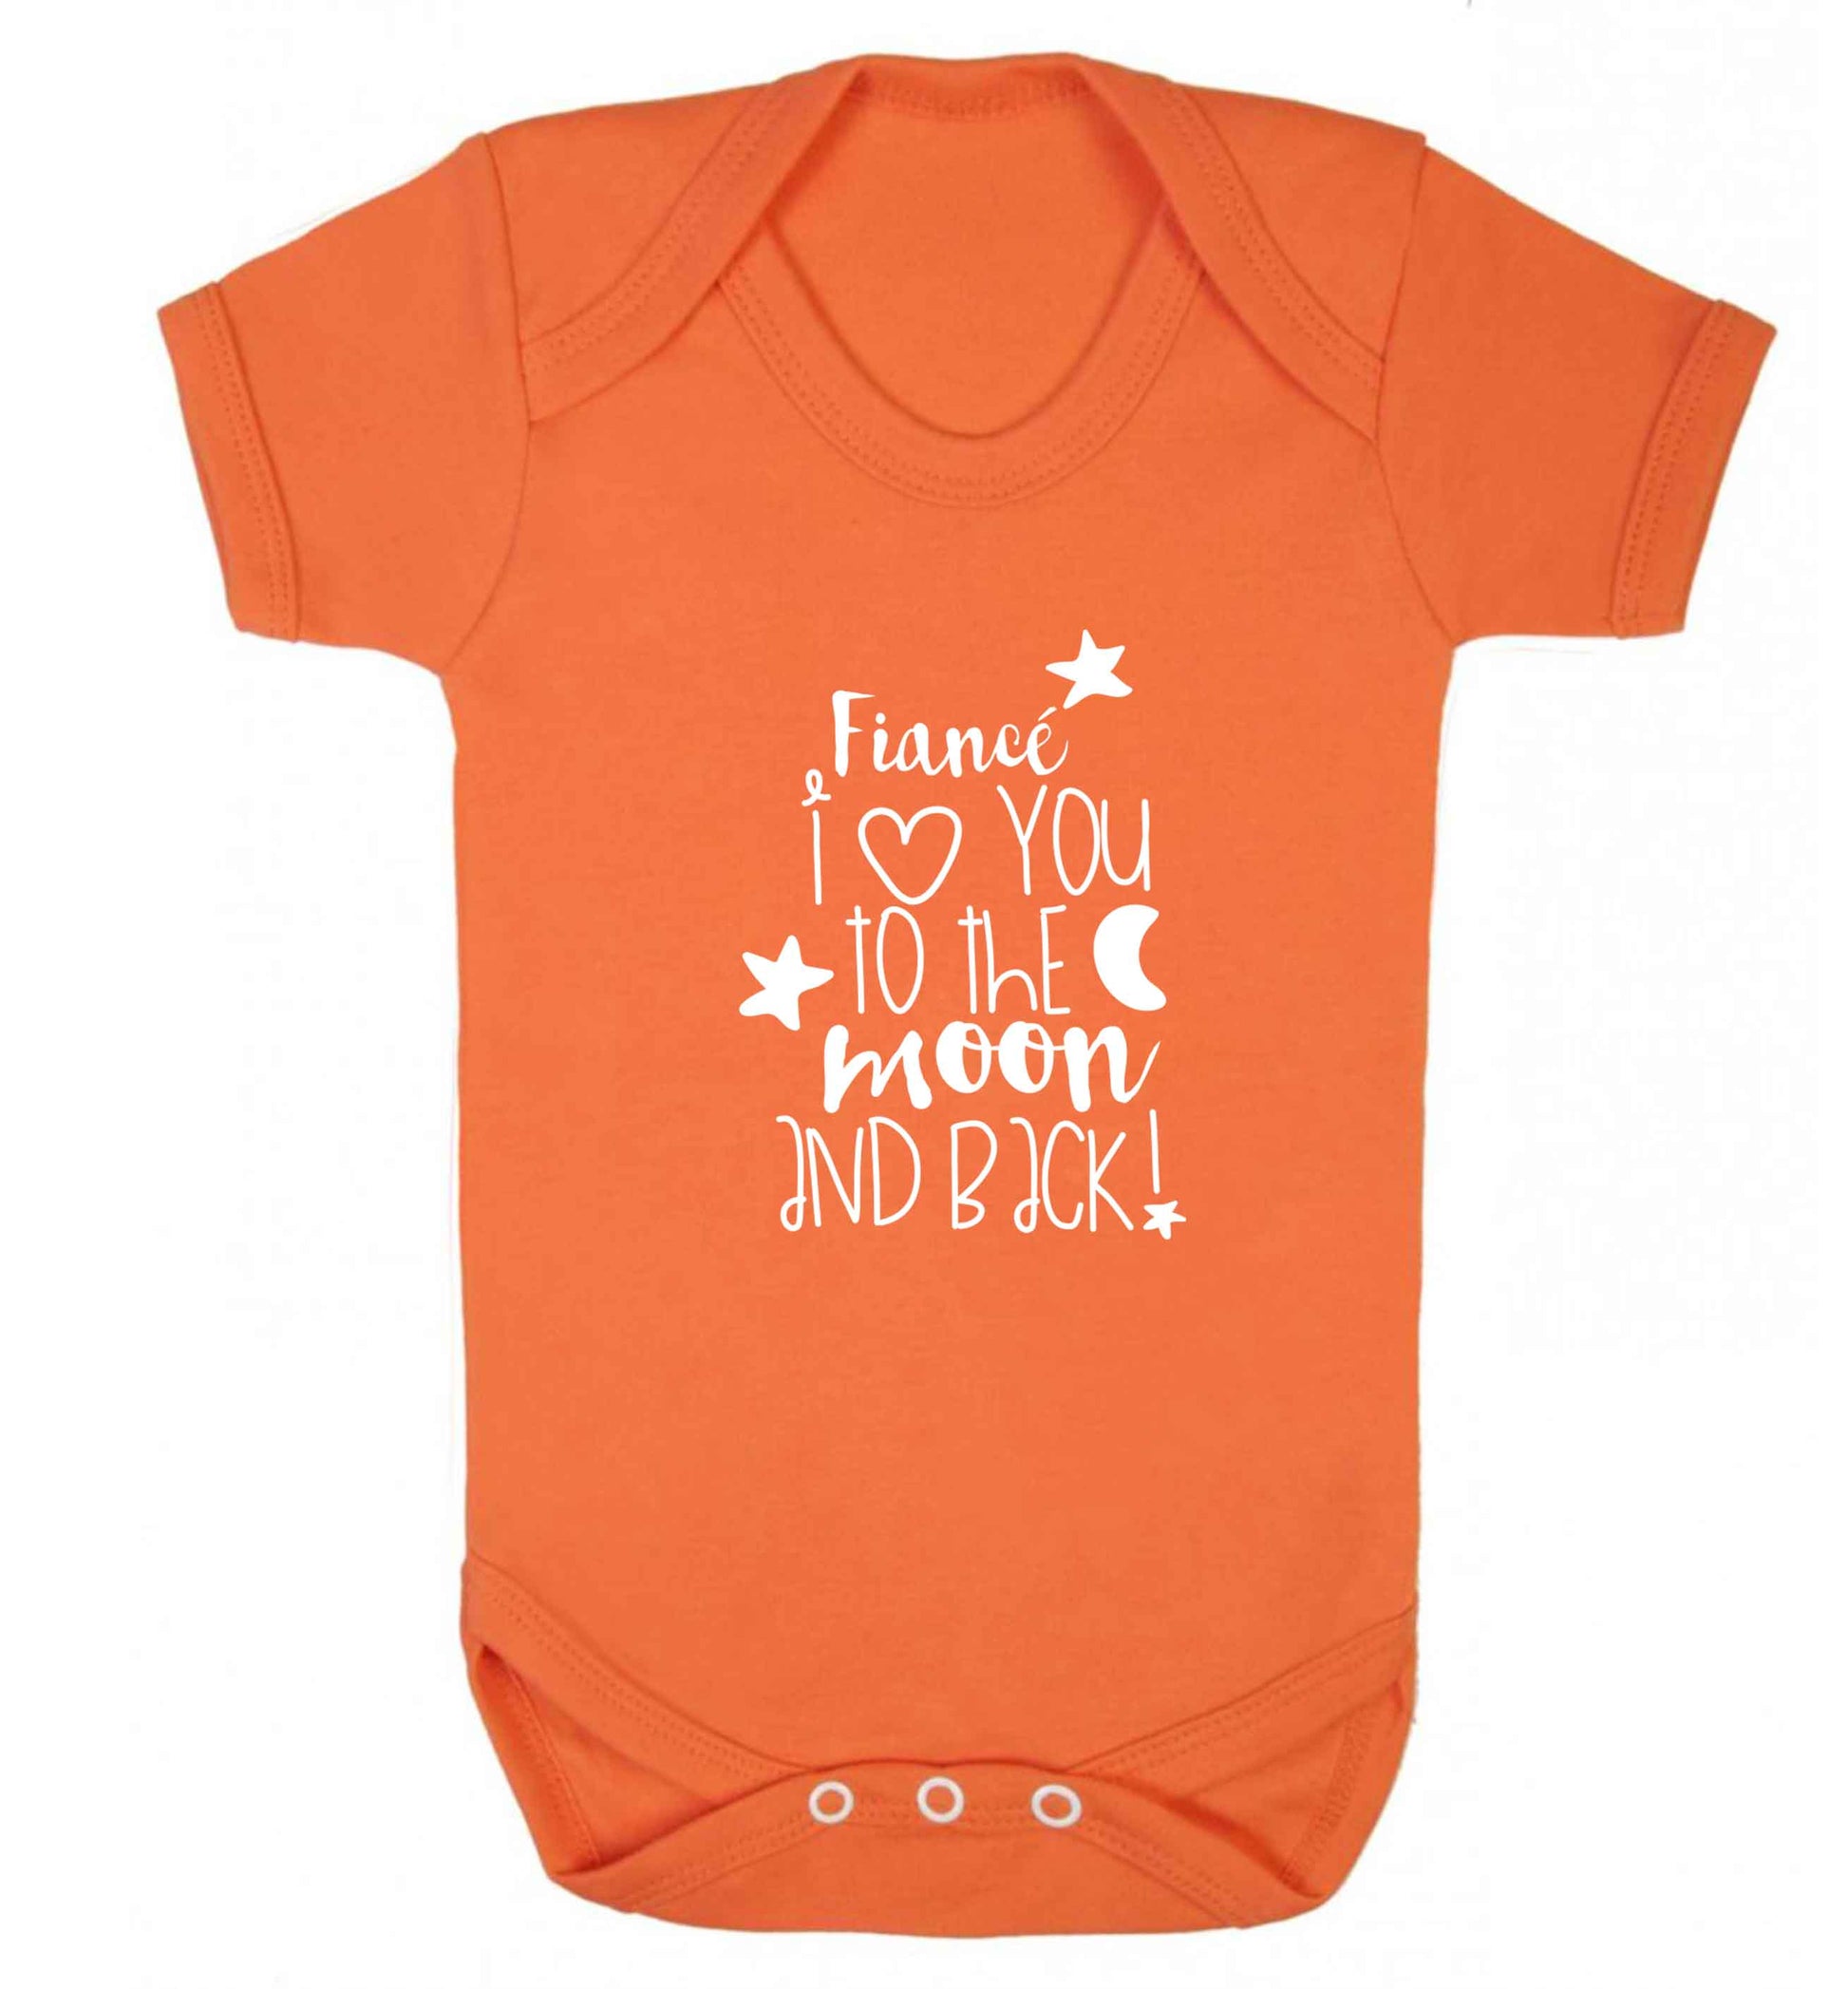 Fianc√© I love you to the moon and back baby vest orange 18-24 months